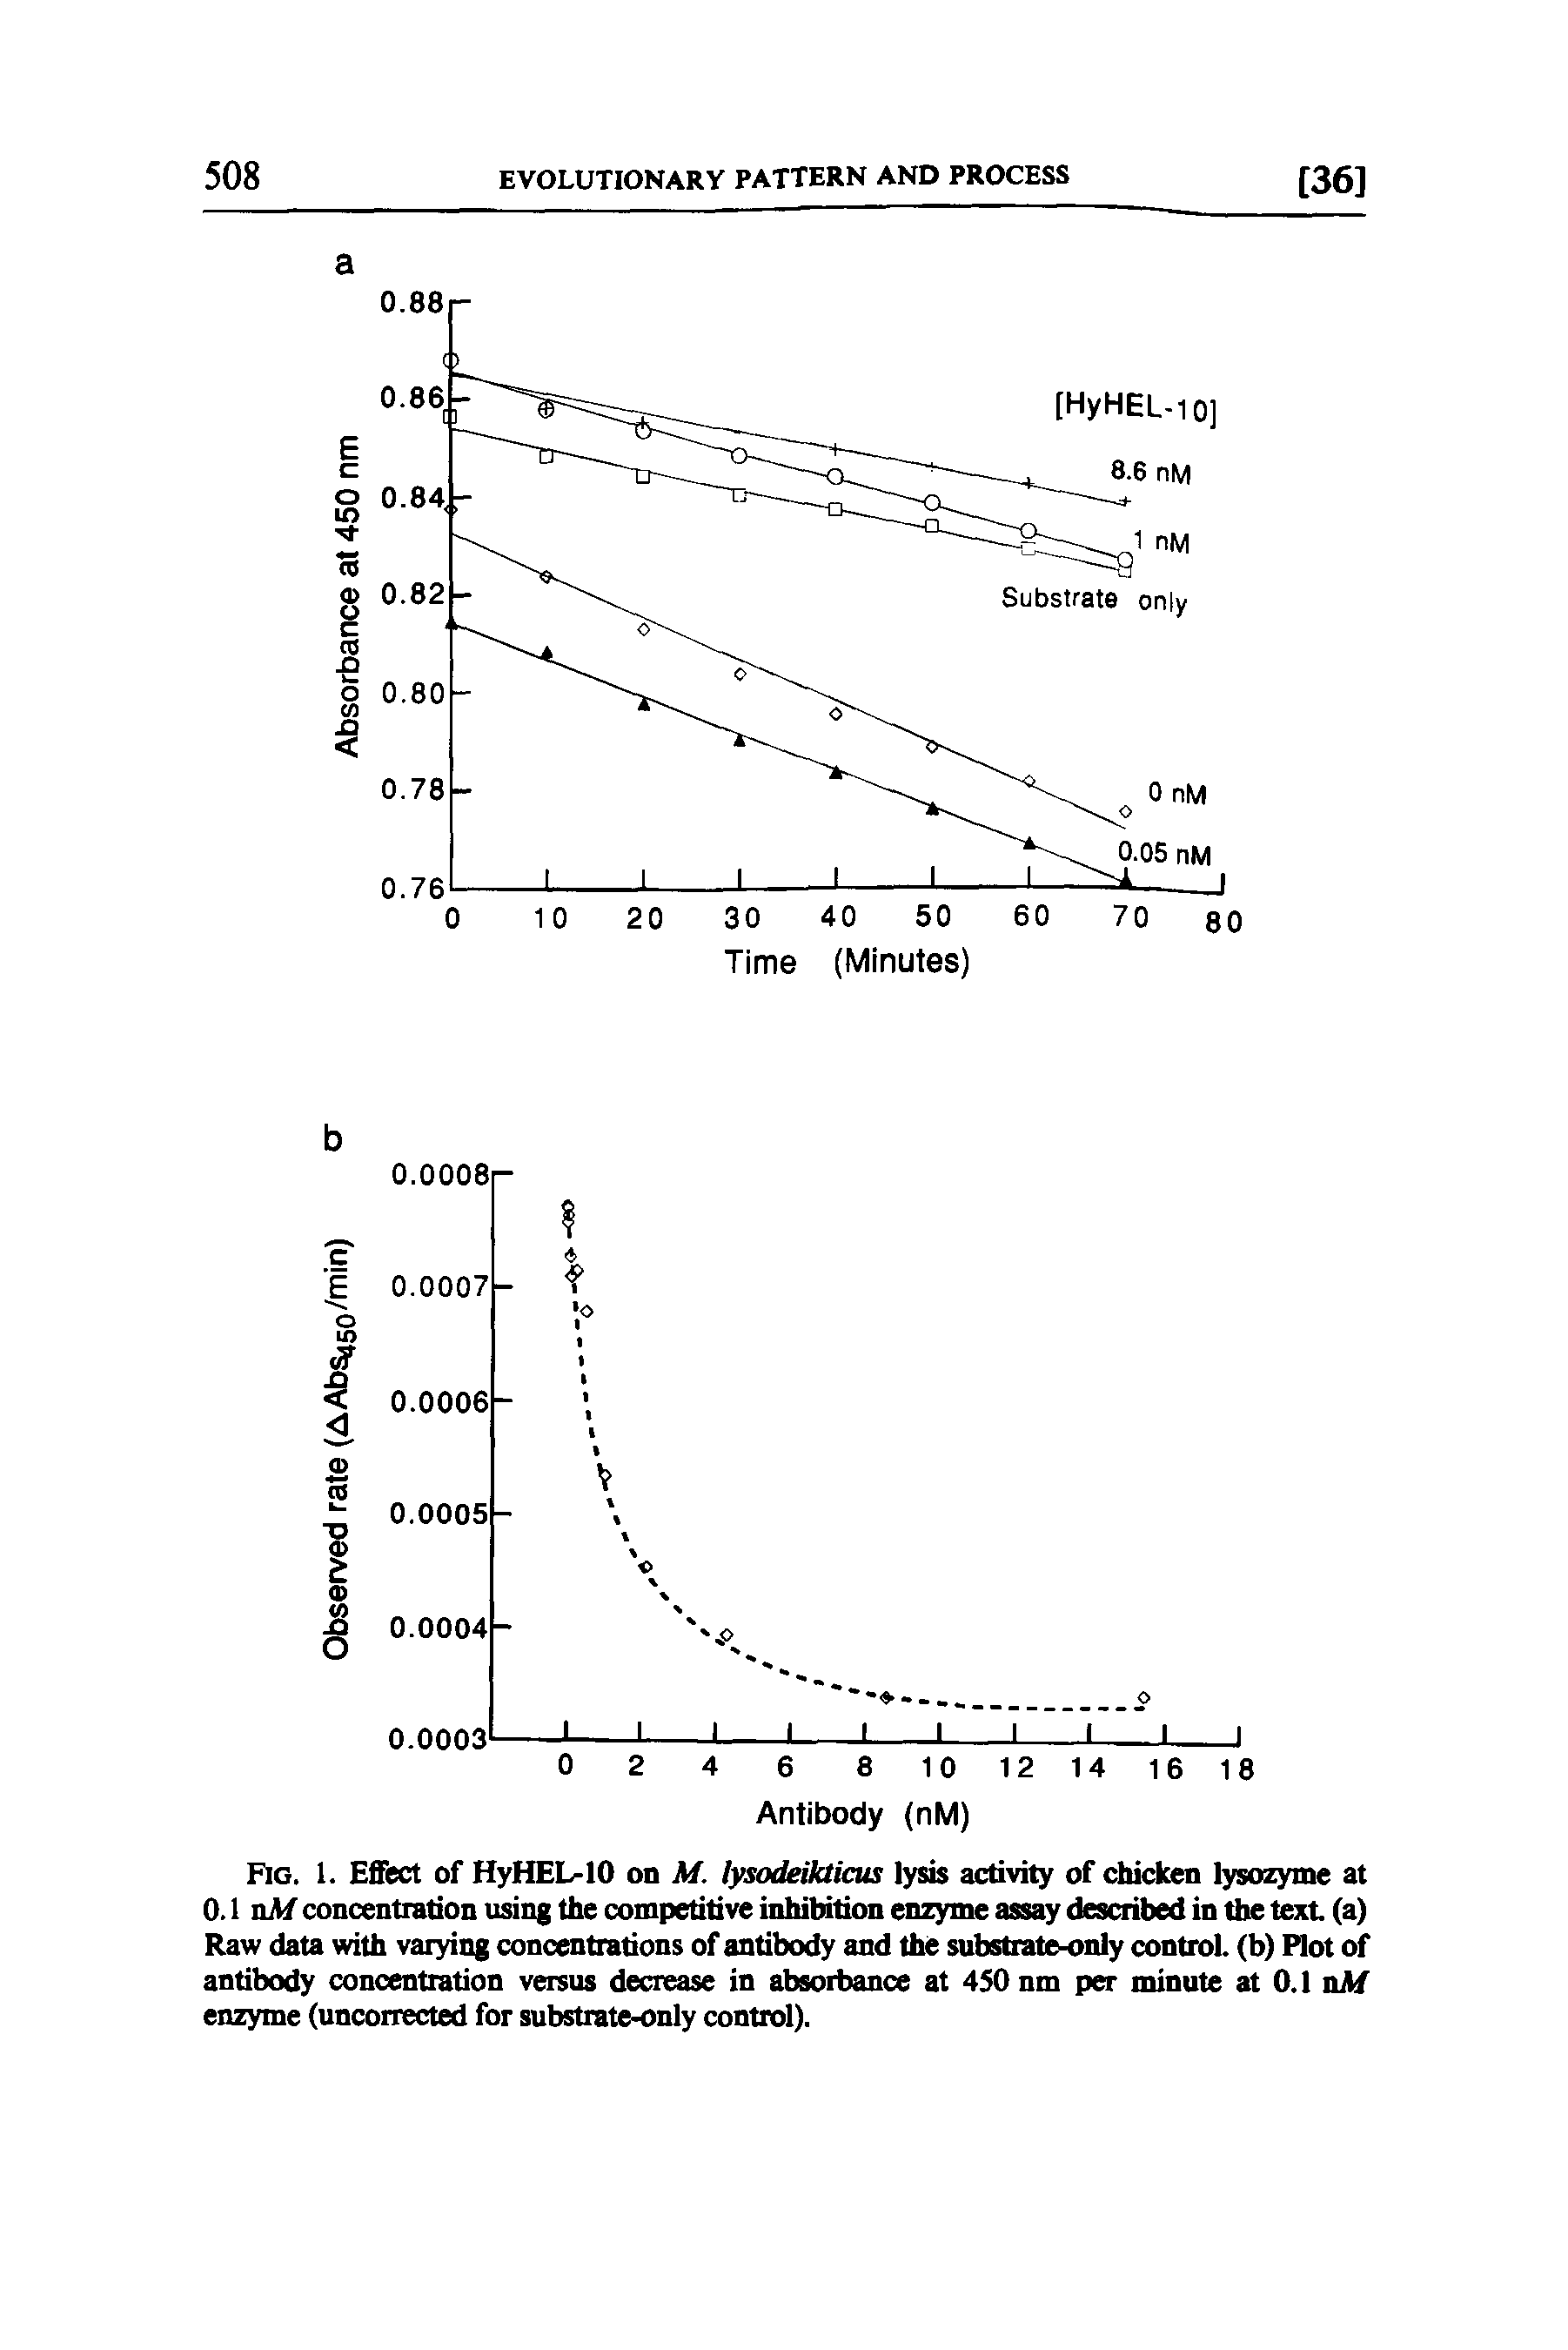 Fig. 1. Effect of HyHEL-10 on M. lysodeikticus lysis activity of chicken lysozyme at 0.1 nM concentration using the competitive inhibition enzyme assay described in the text (a) Raw data with varying concentrations of antibody and the substrate-only control, (b) Plot of antibody concentration versus decrease in absorbance at 450 nm per minute at 0.1 nAf enzyme (unconected for substrate-only control).